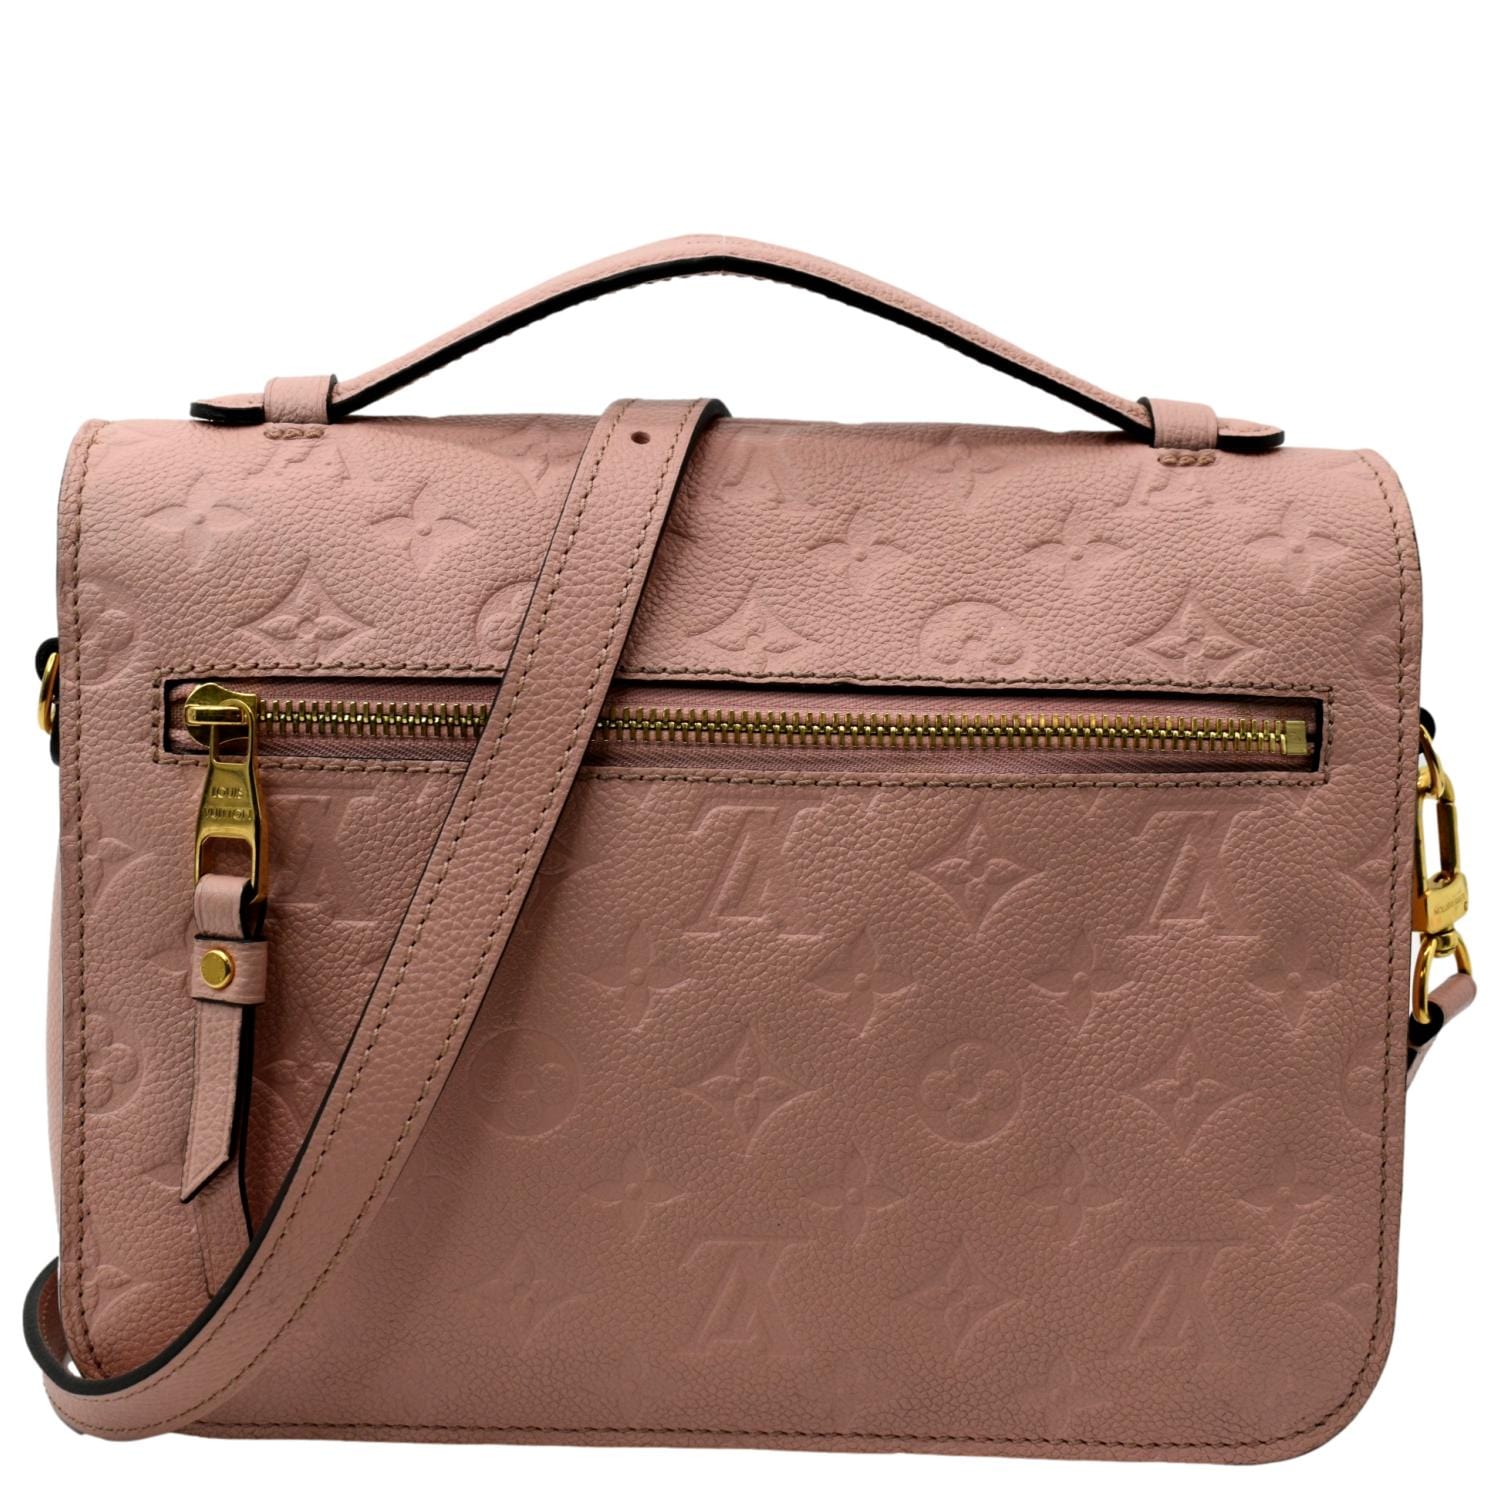 Metis leather crossbody bag Louis Vuitton Pink in Leather - 35196425